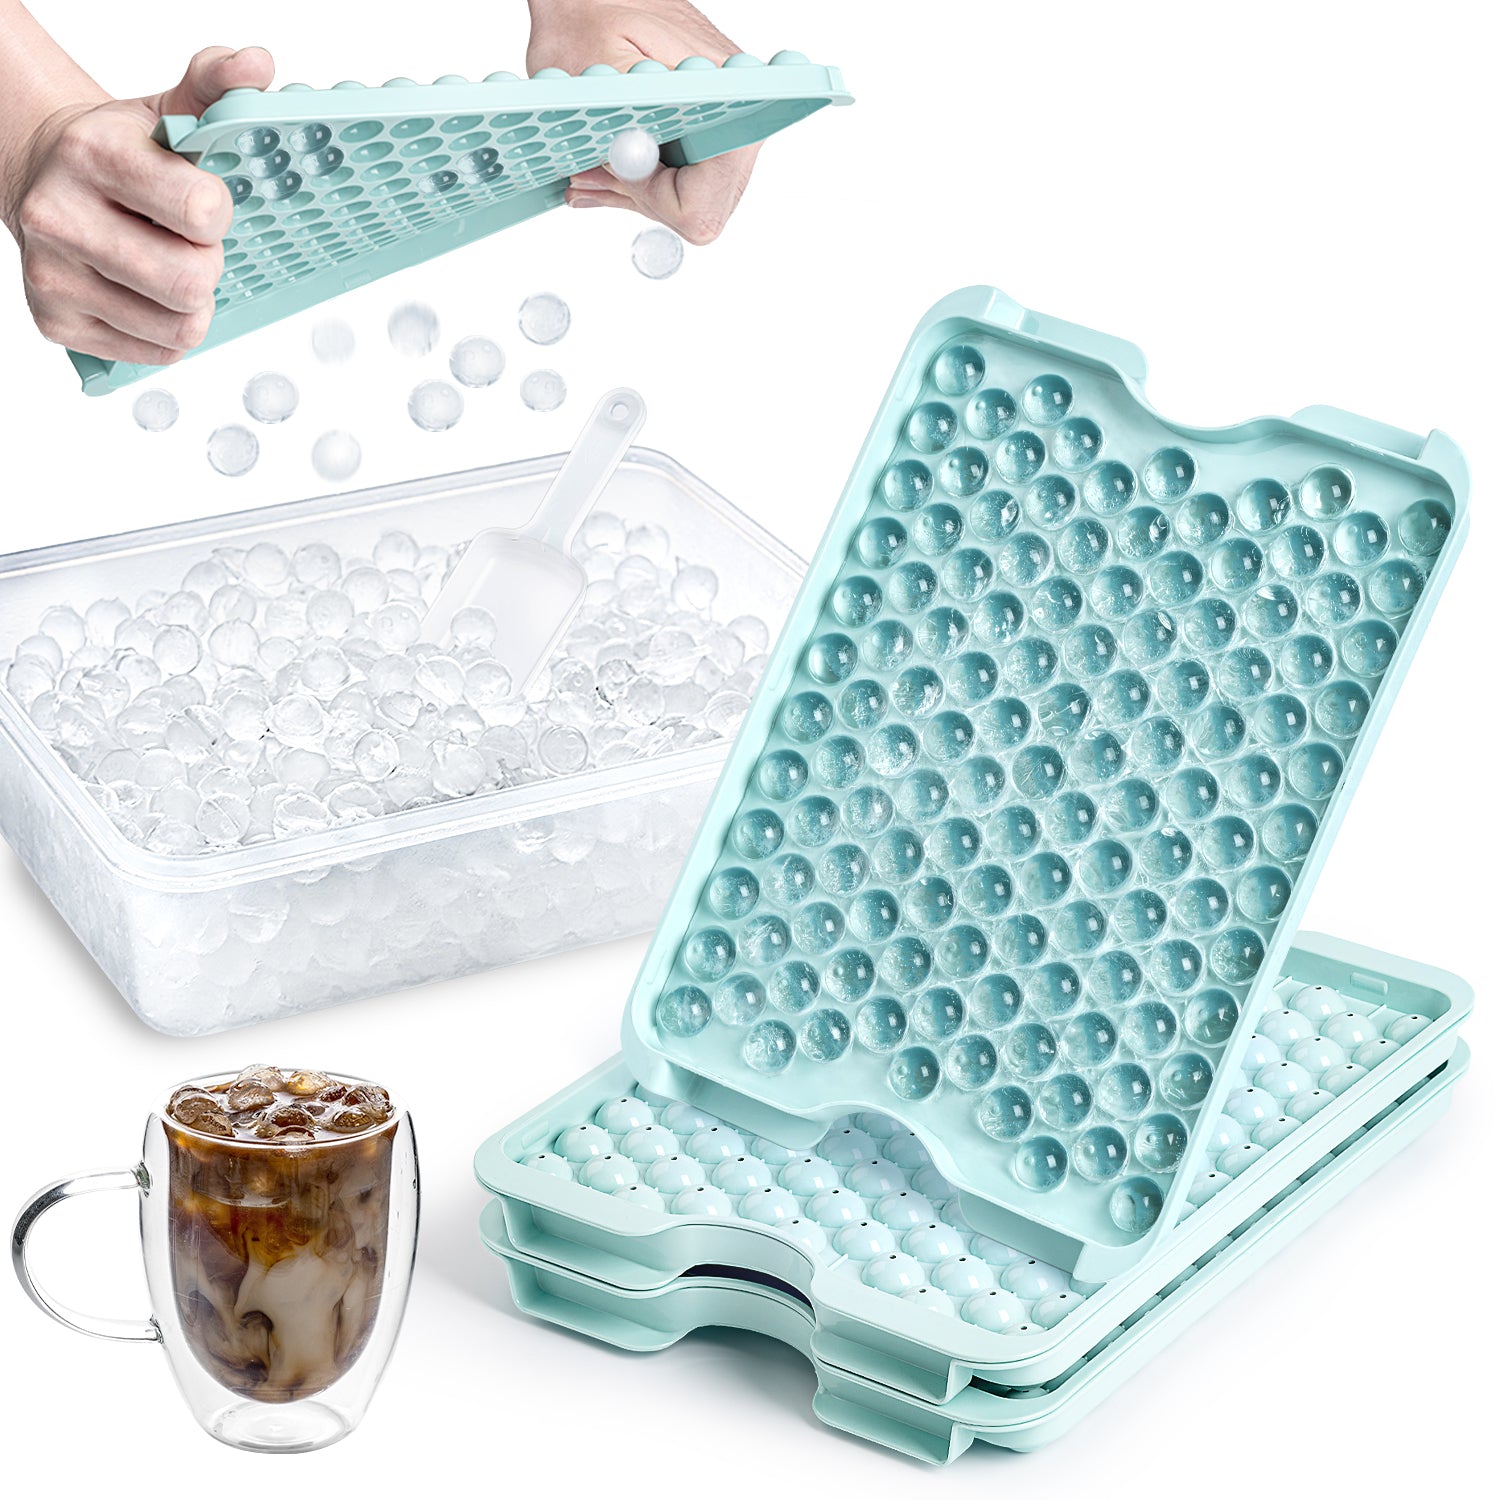 6-in-1 Ice Cube Maker Ice Cube Tray with Lid and Bin, Silicone Ice Trays